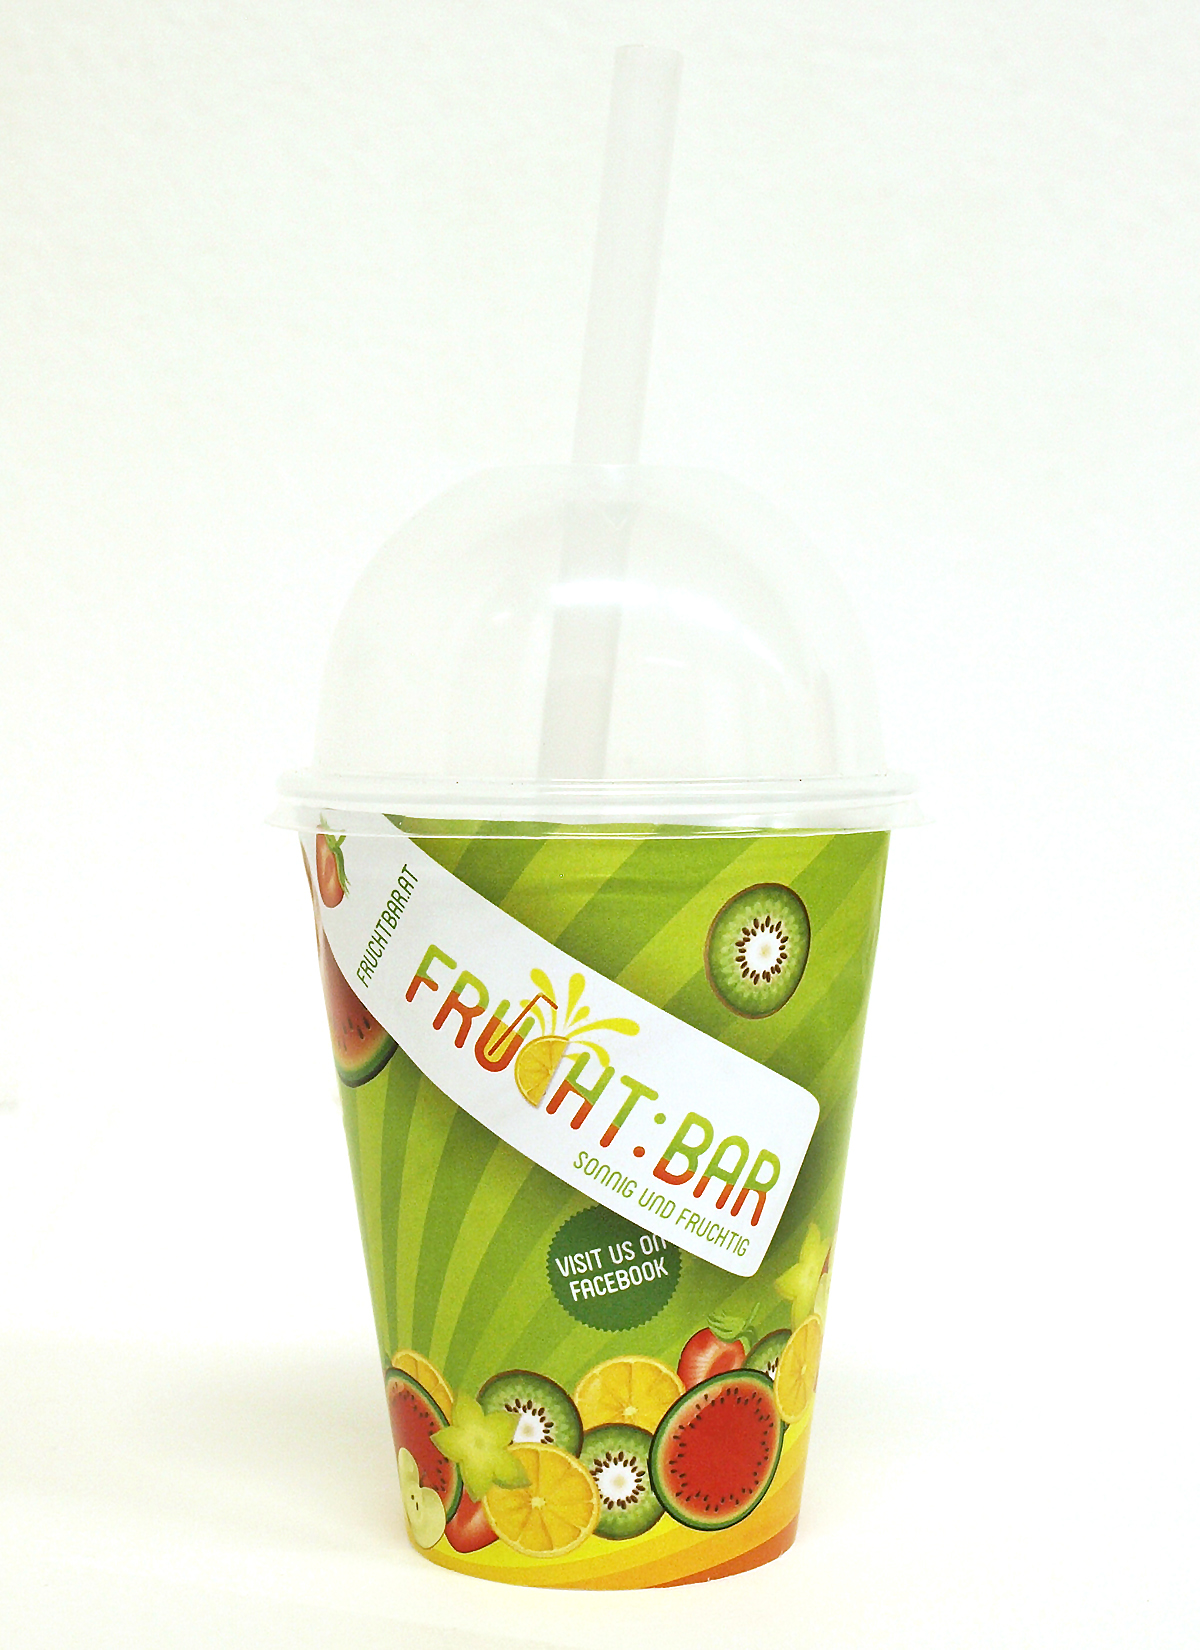 Fruit shake individual drinks Corporate Design package design  ecological